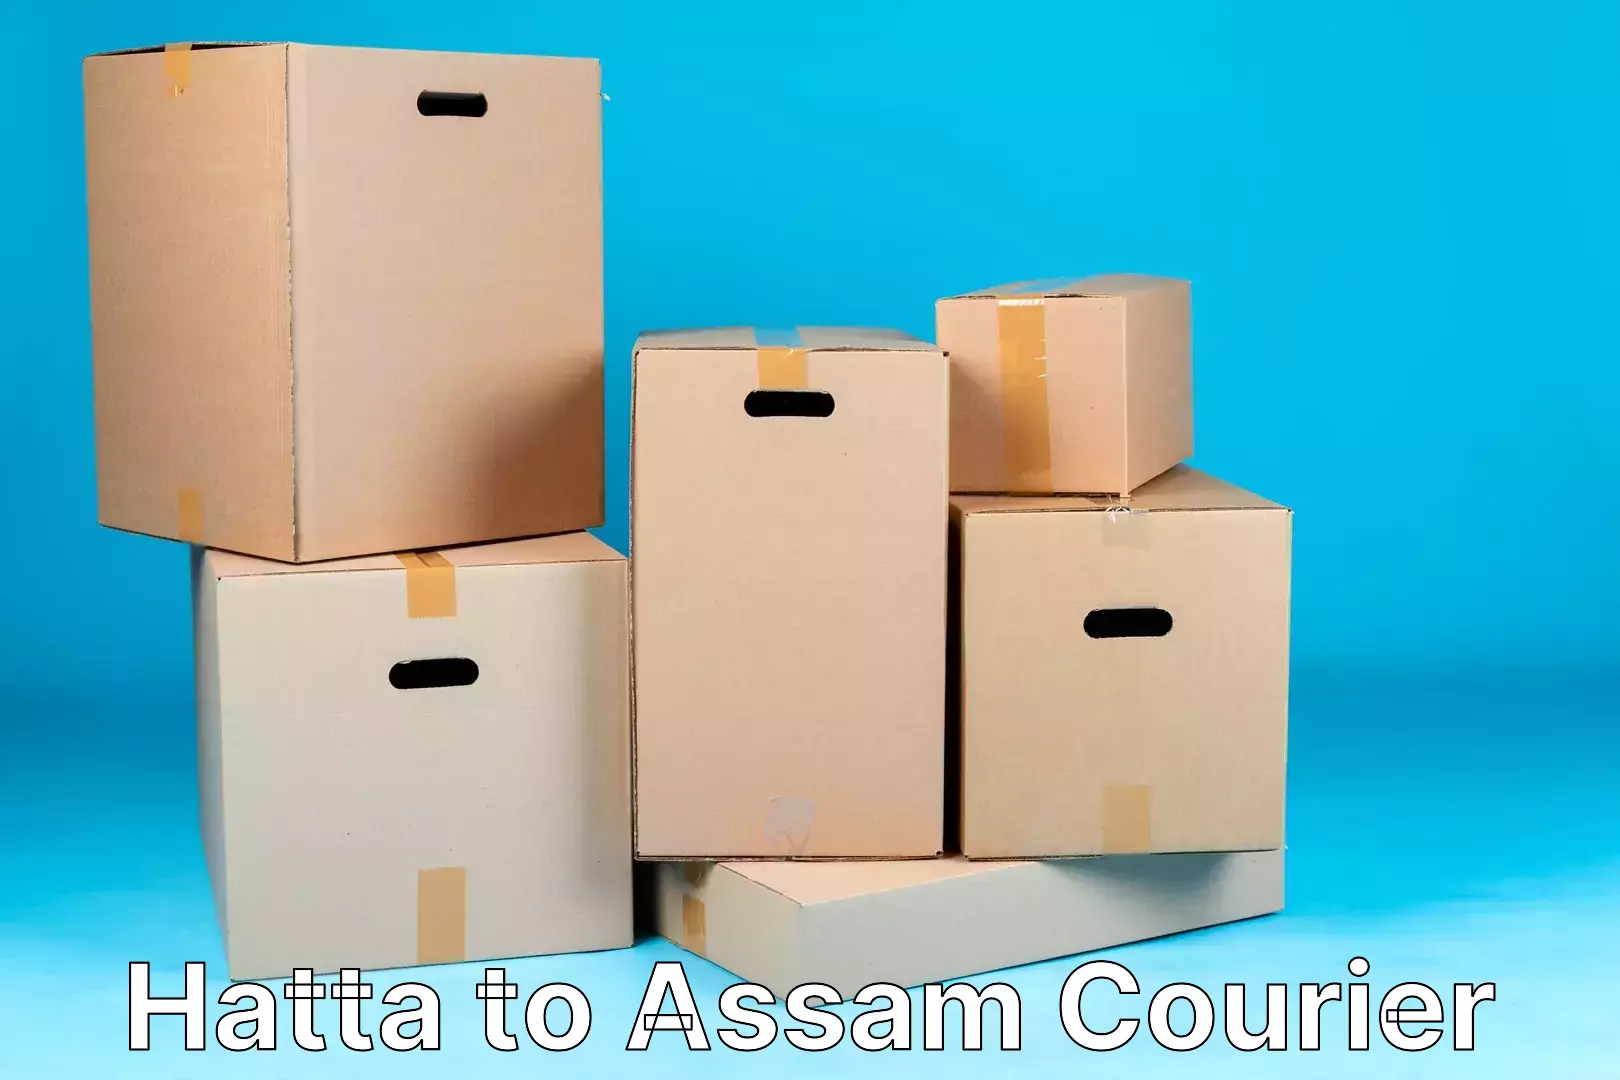 Same-day delivery options Hatta to Assam